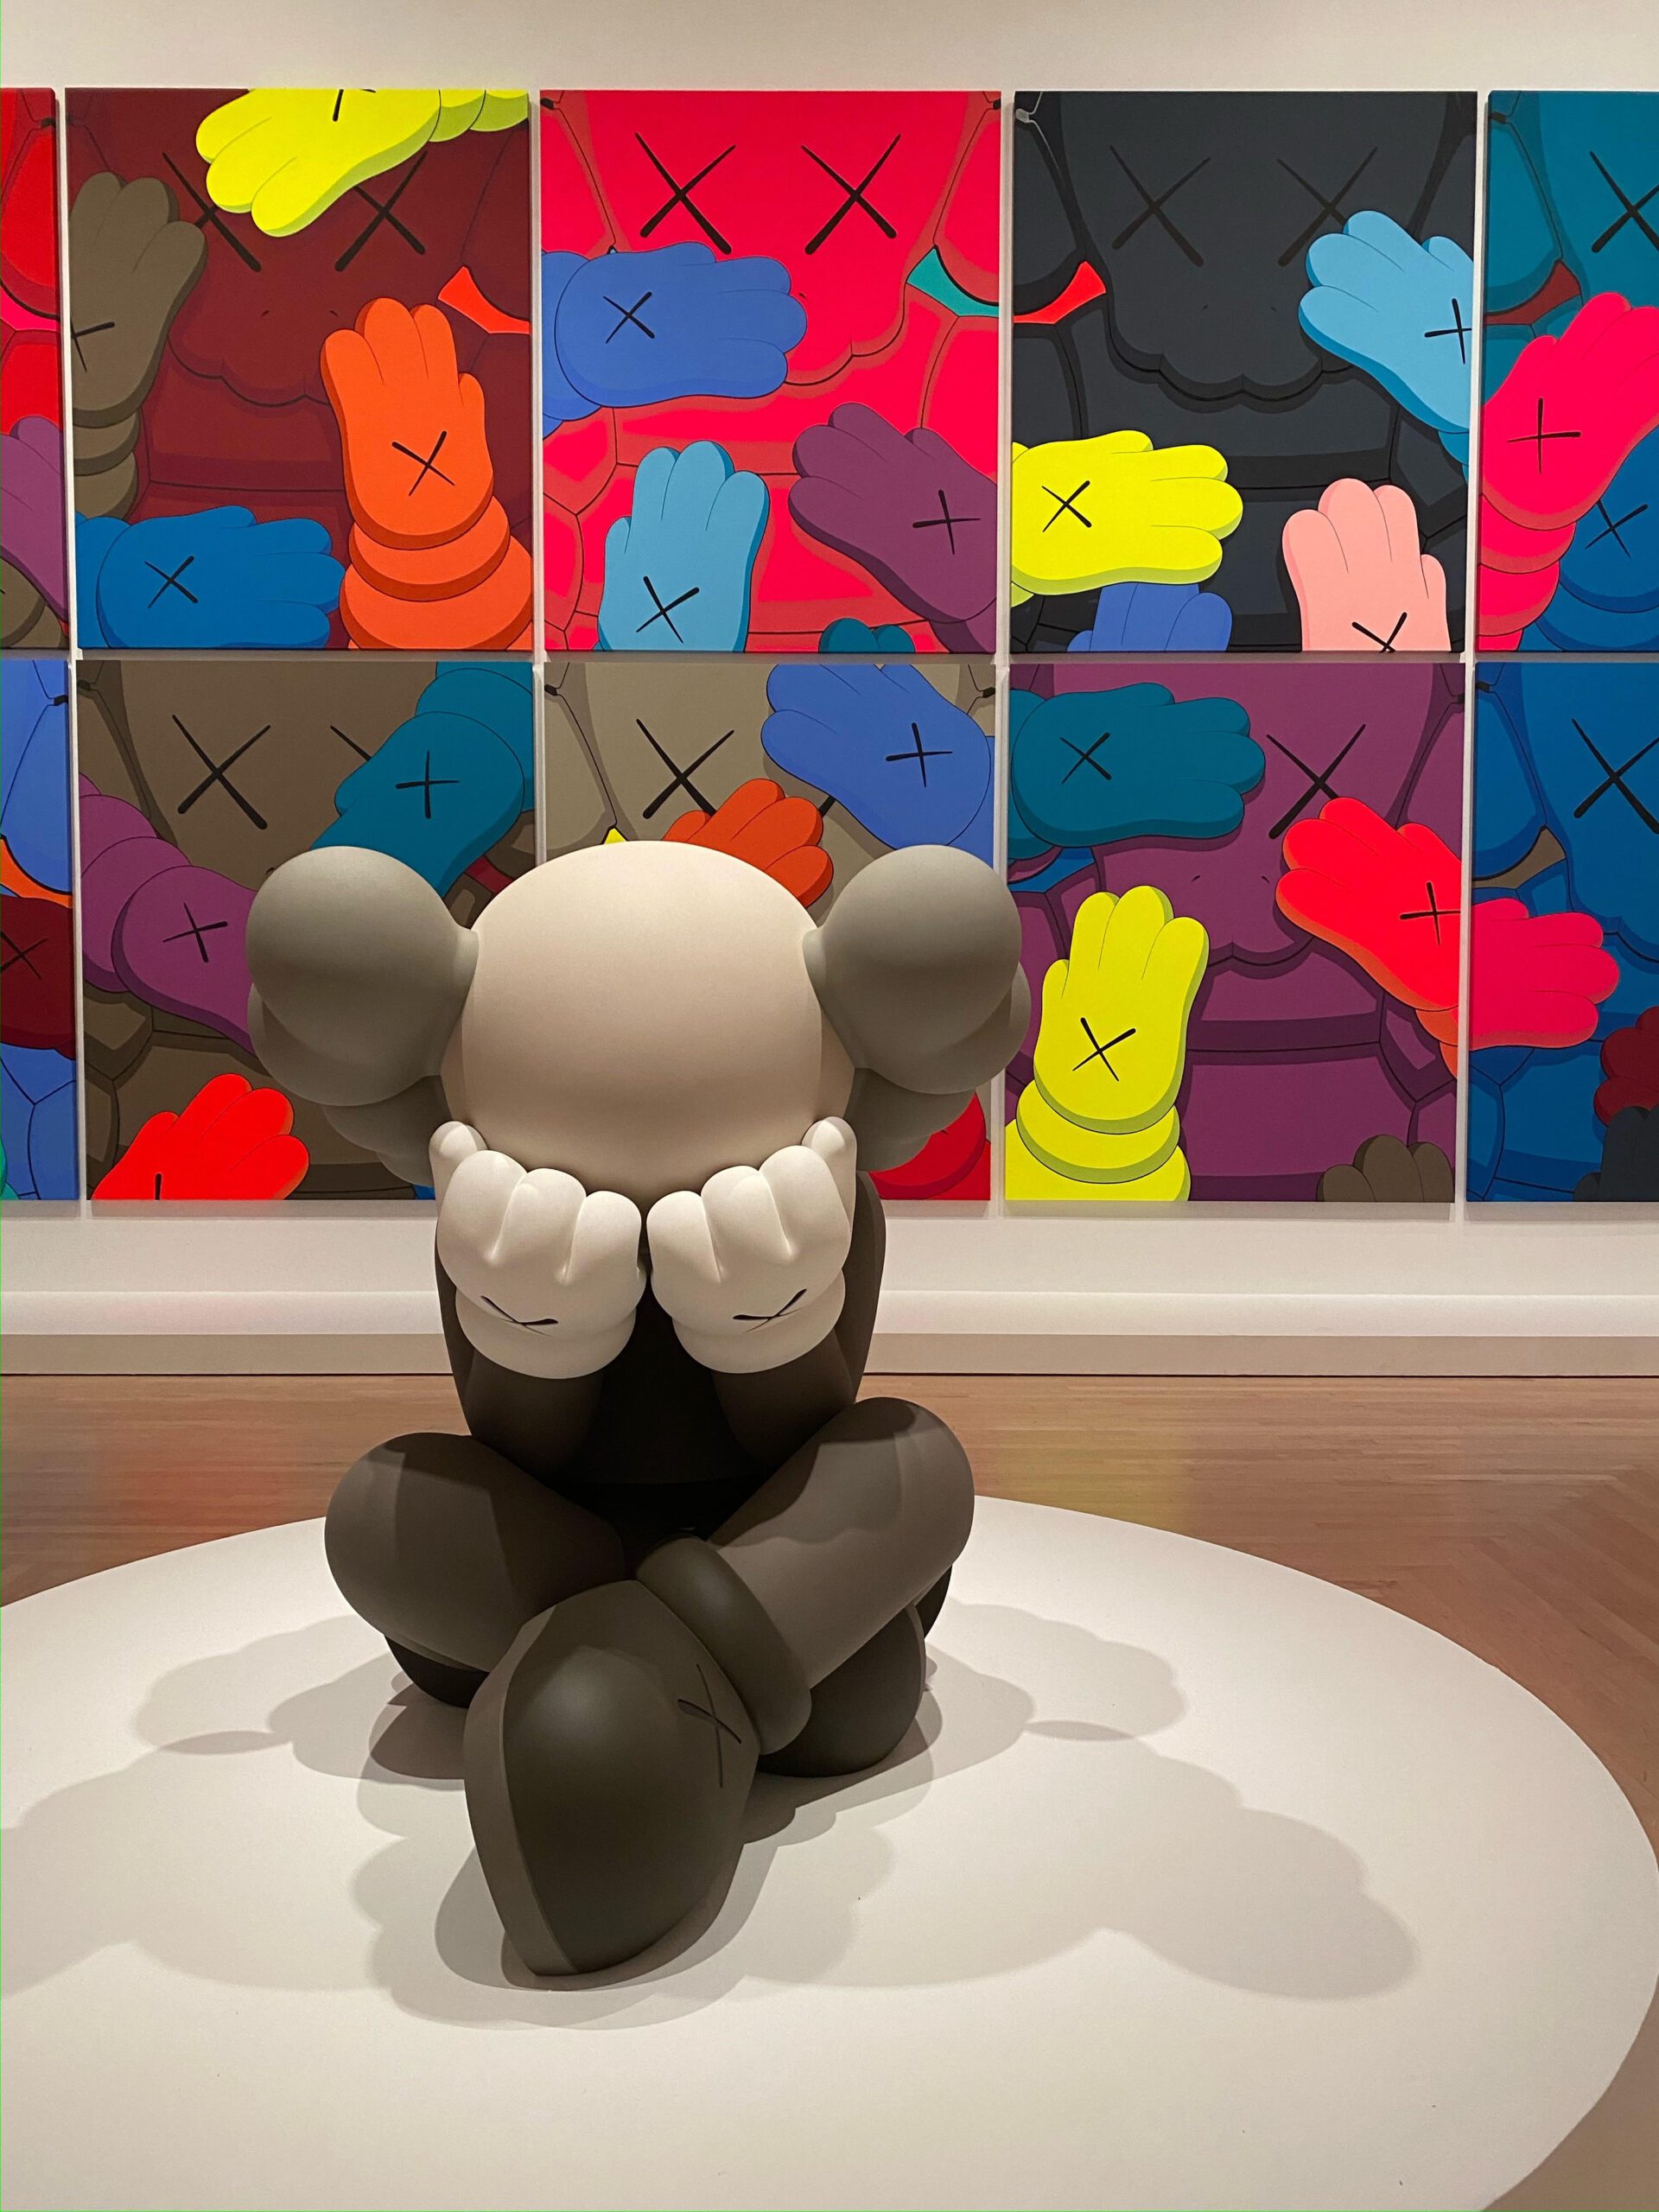 KAWS is one of today's most popular artists - and one of the most